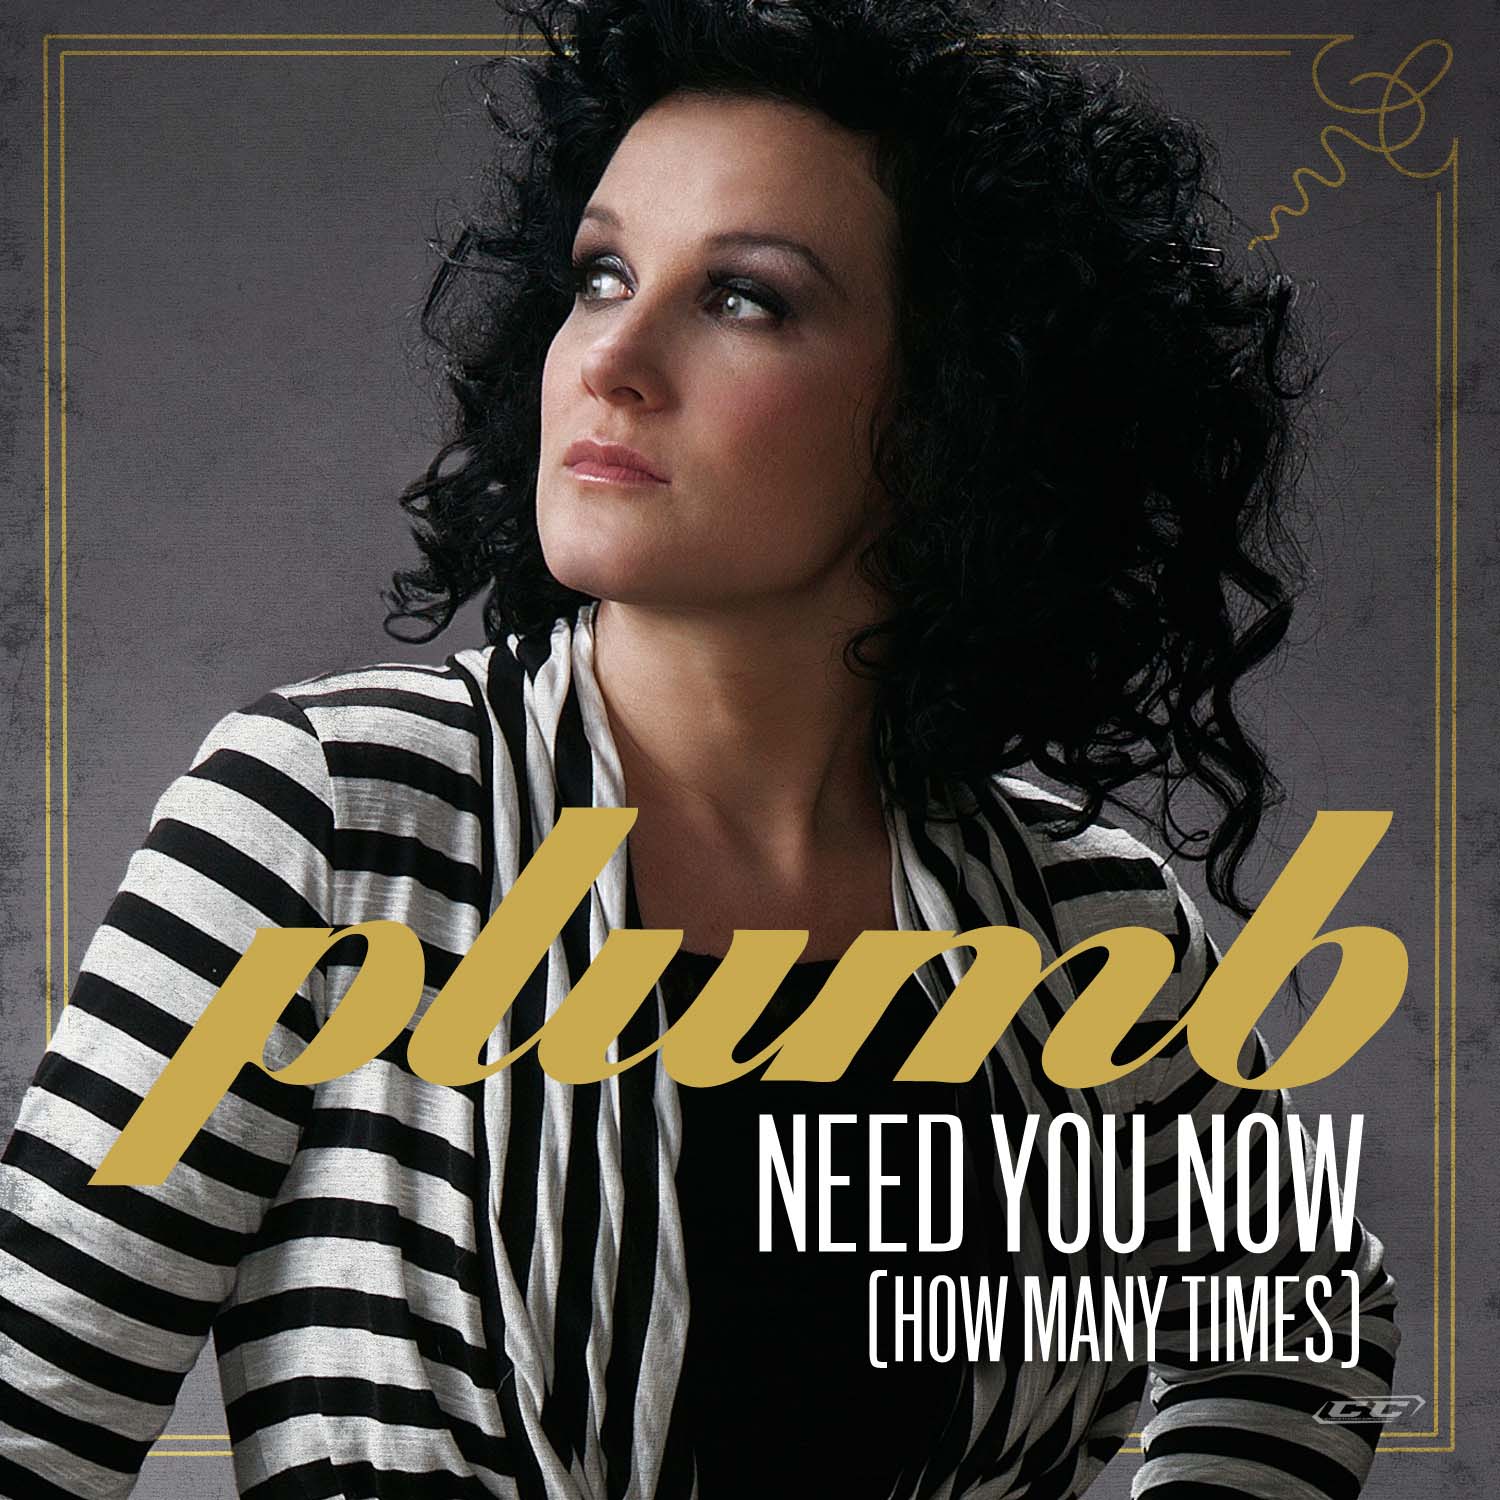 Plumb - Need You Now 2013 Biography and history